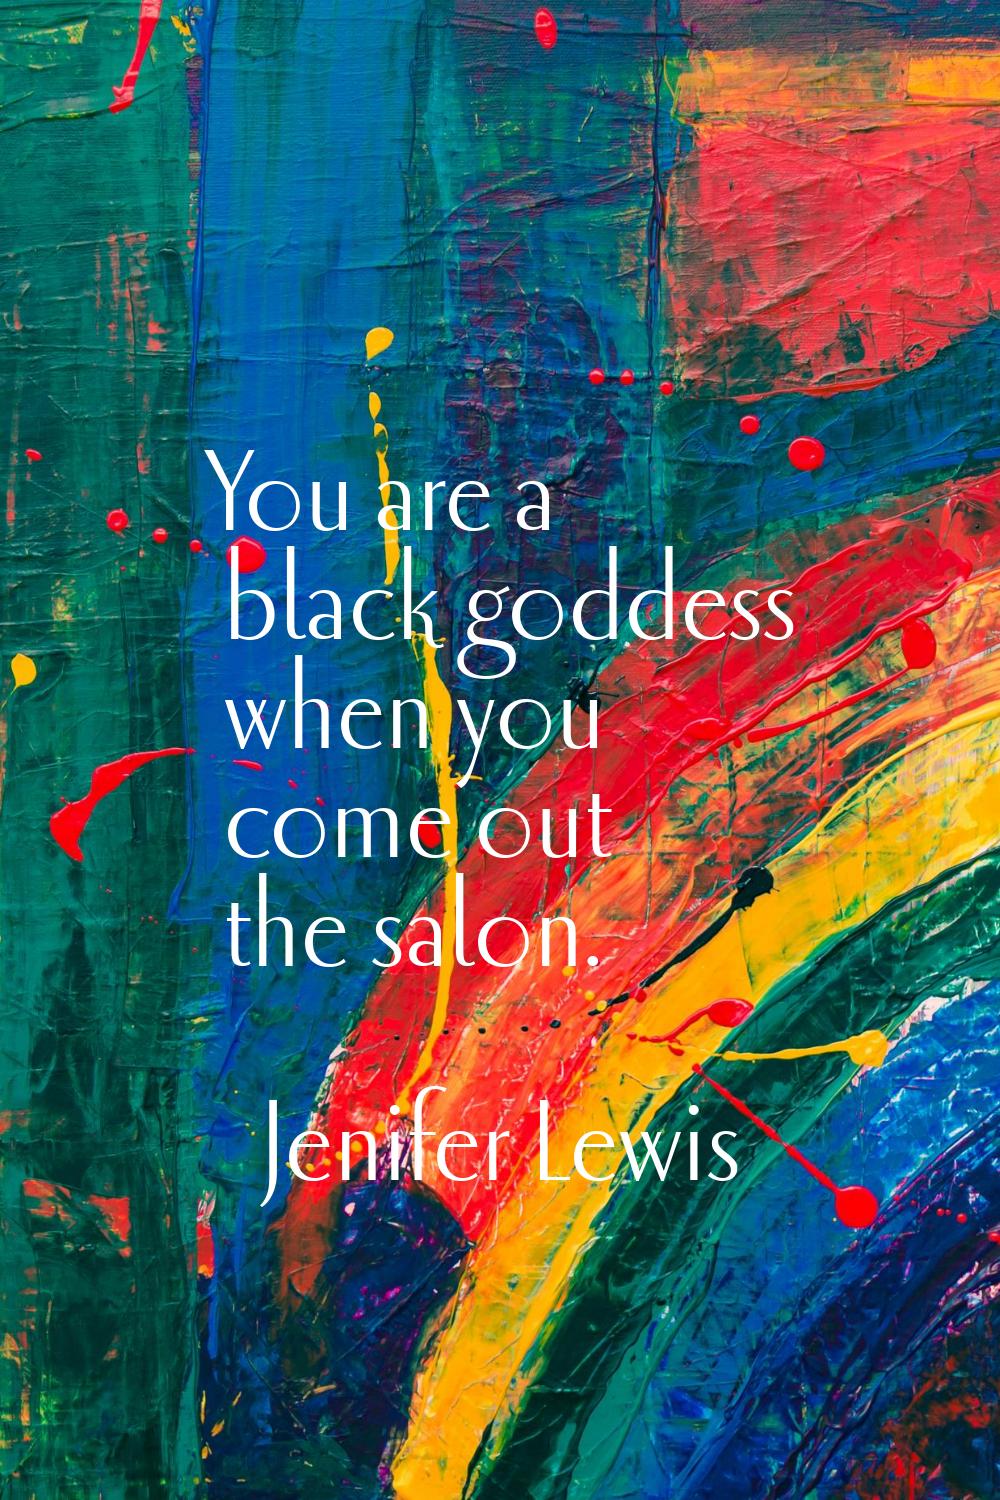 You are a black goddess when you come out the salon.